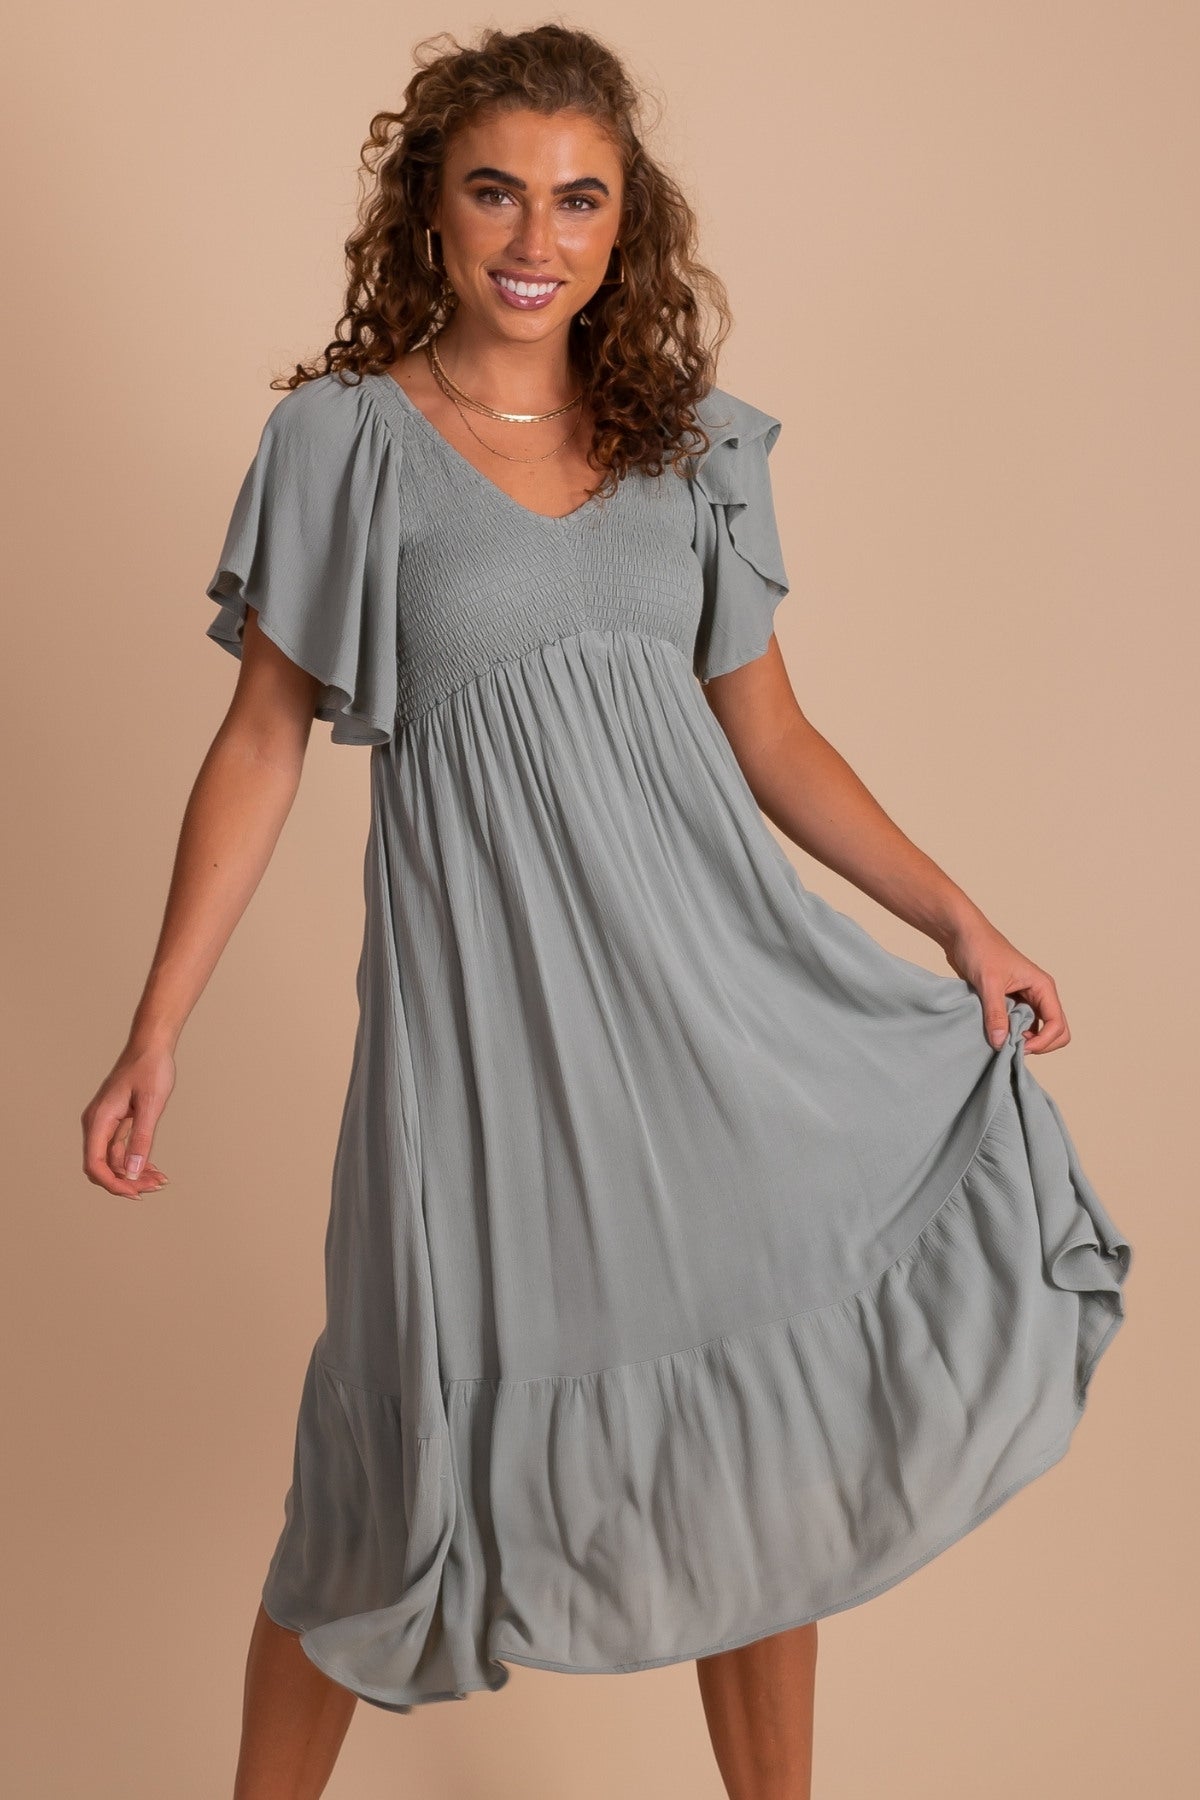 Women's Boho Midi Dress with Smocked Bodice and V Neck in Dusty Sage Green